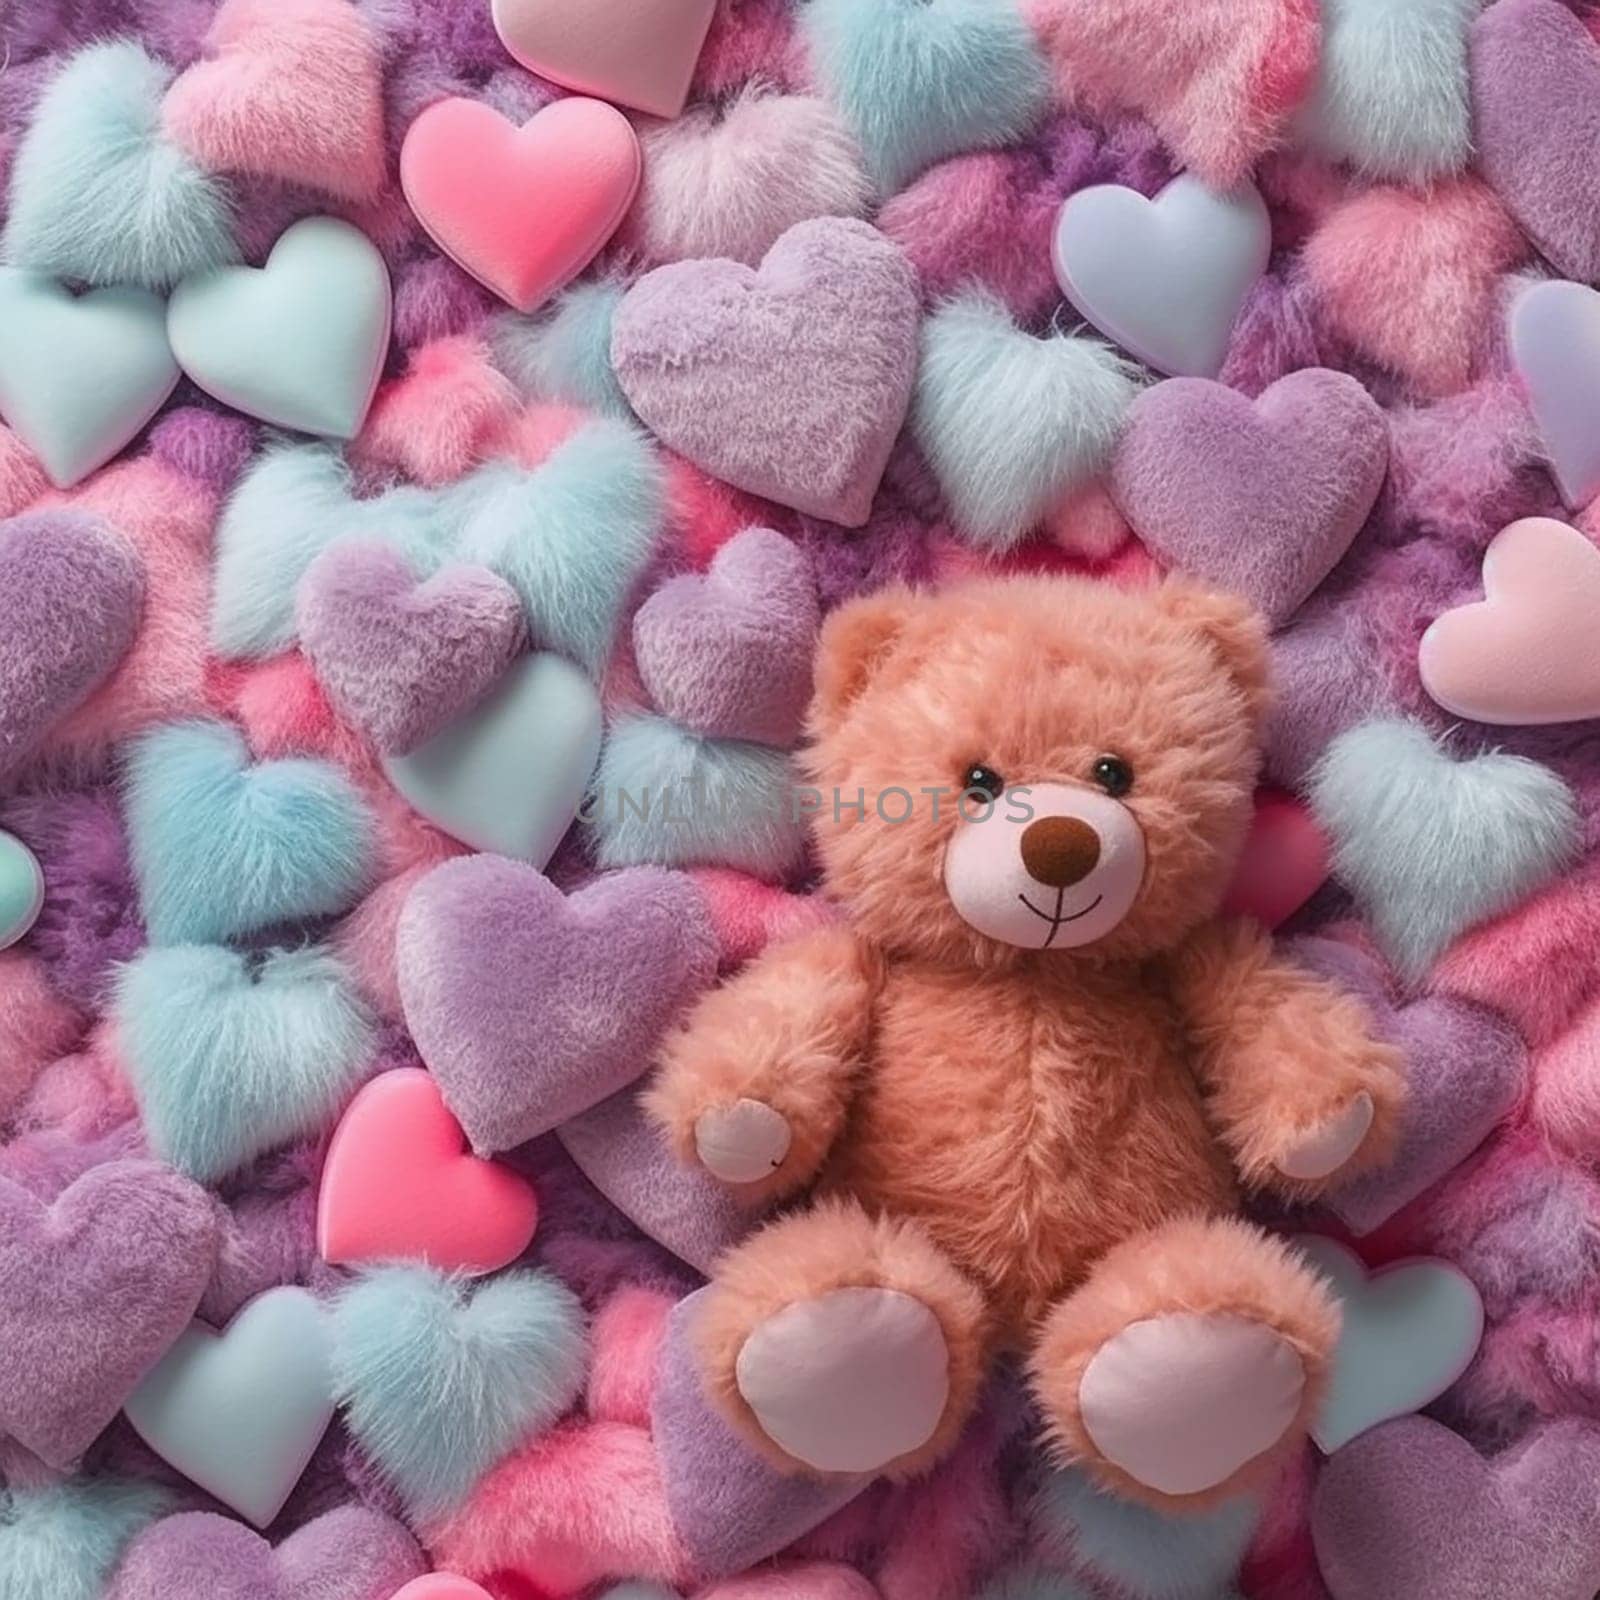 A teddy bear surrounded by colorful hearts on a fluffy background. by Hype2art